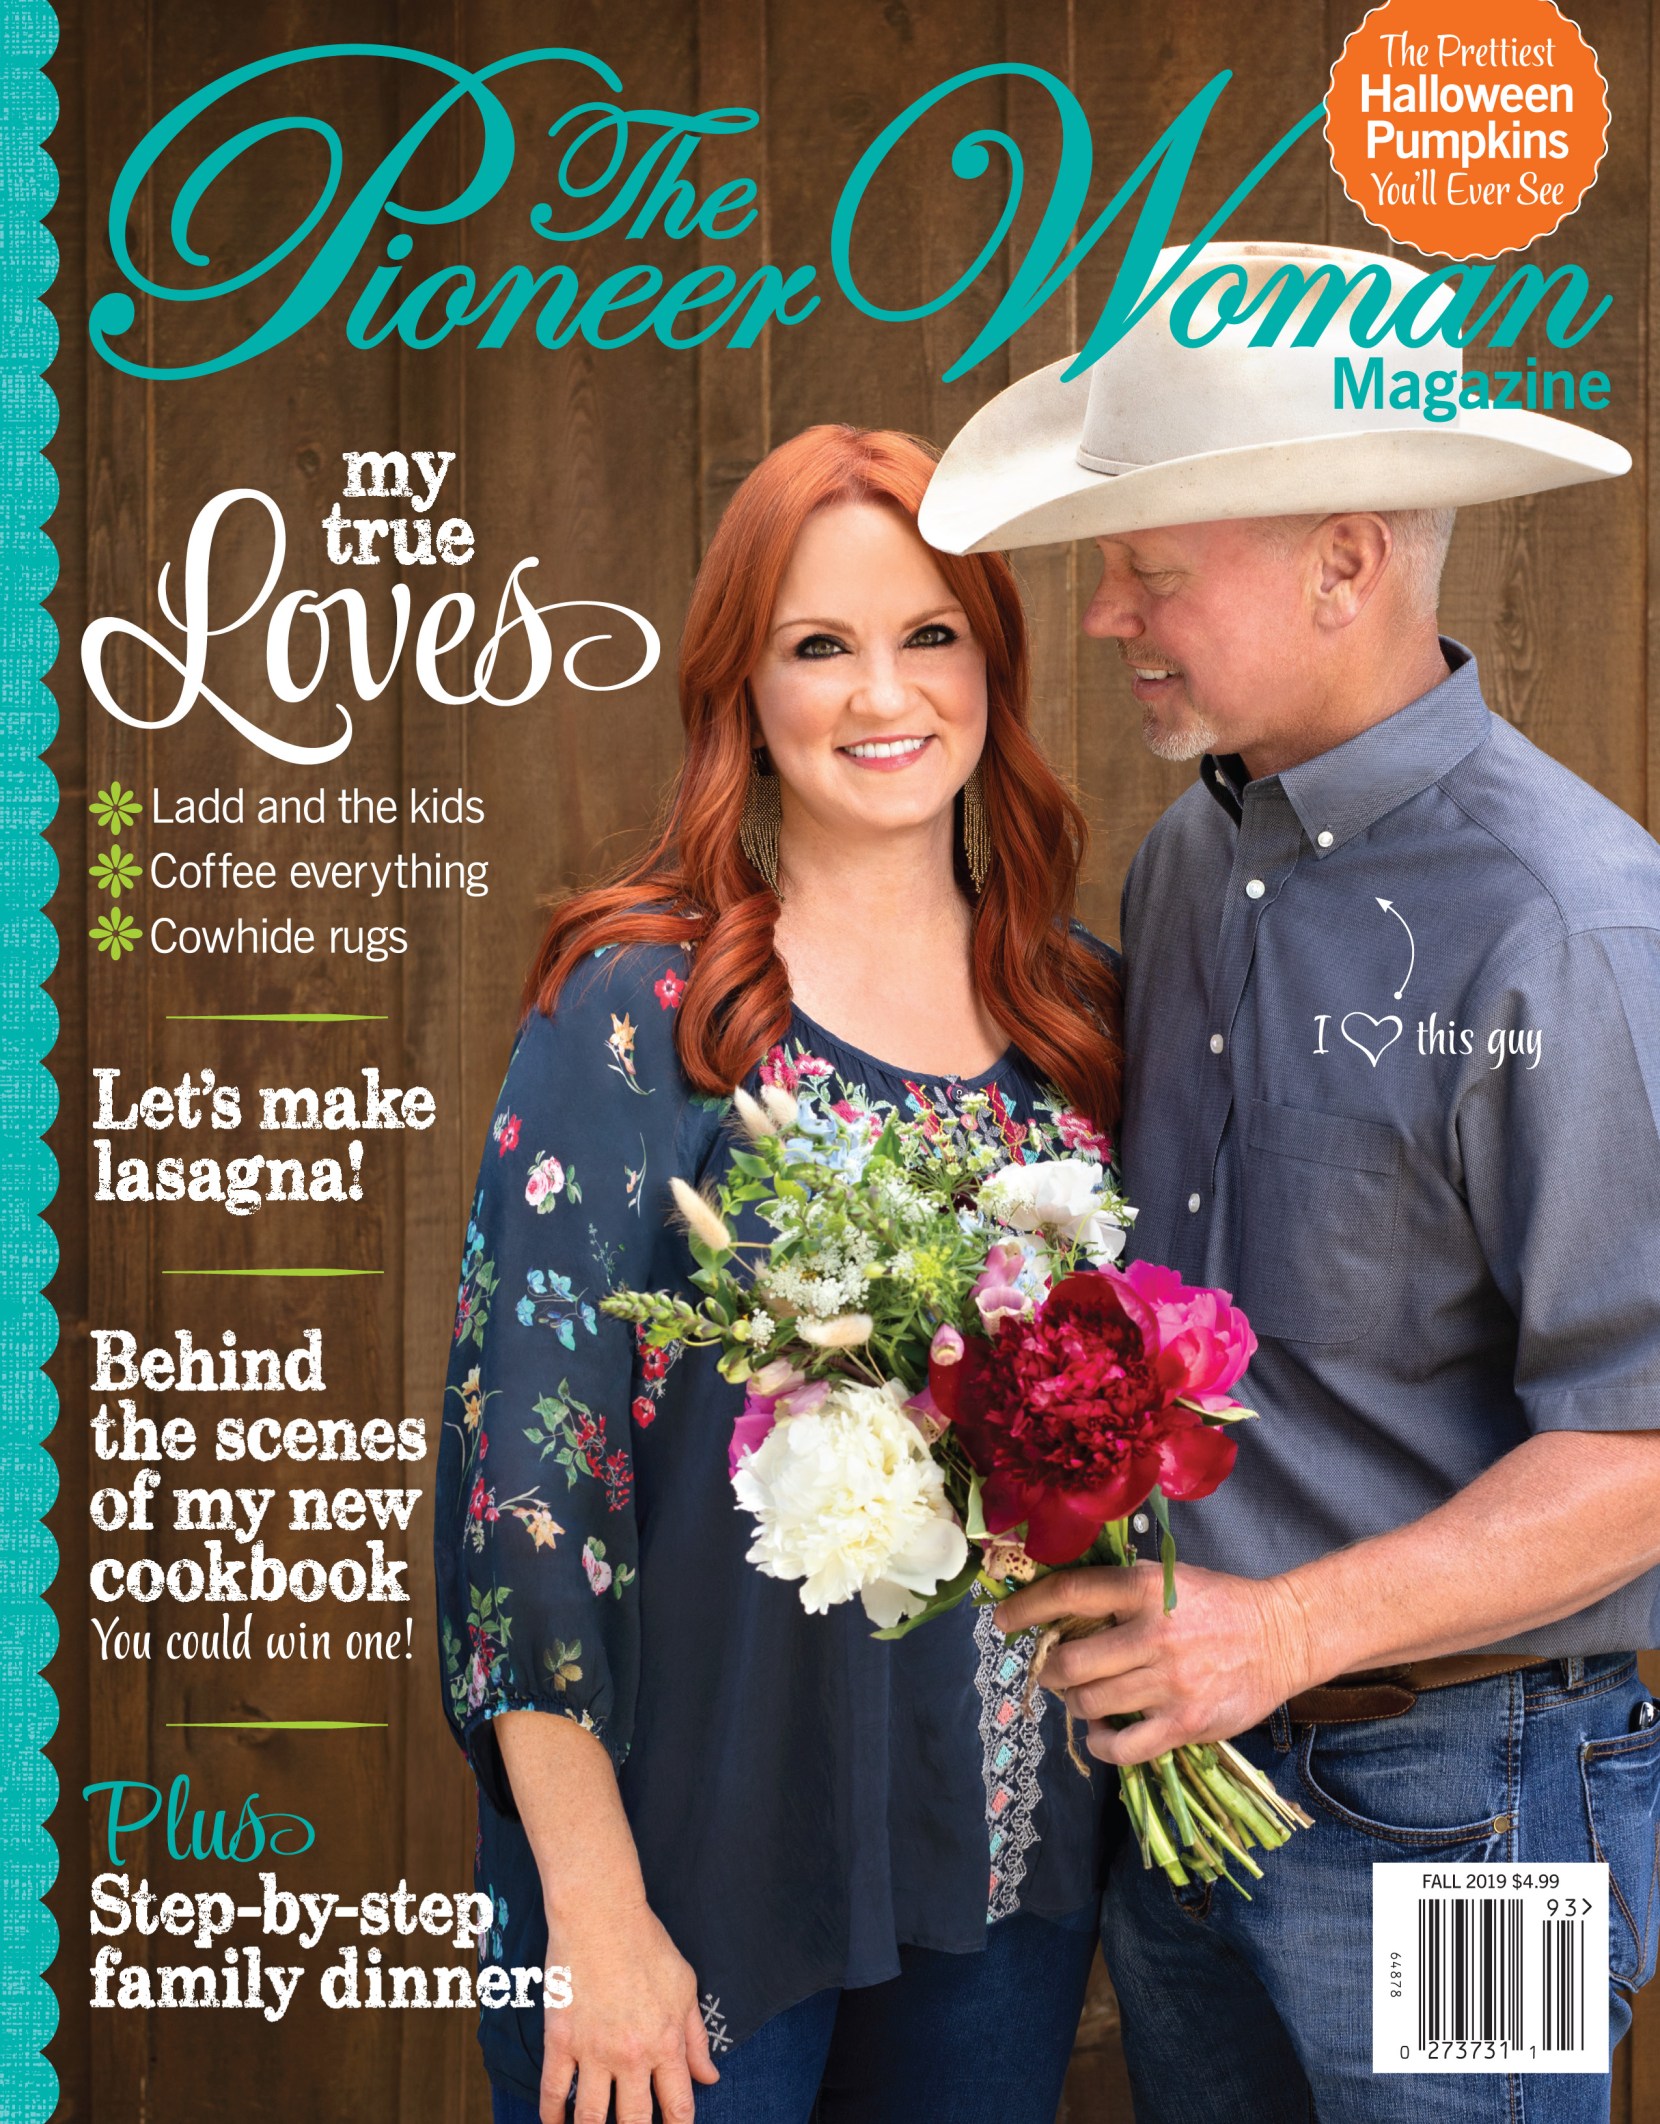 Ree Drummond and Ladd Drummond Pose for Pioneer Woman Magazine